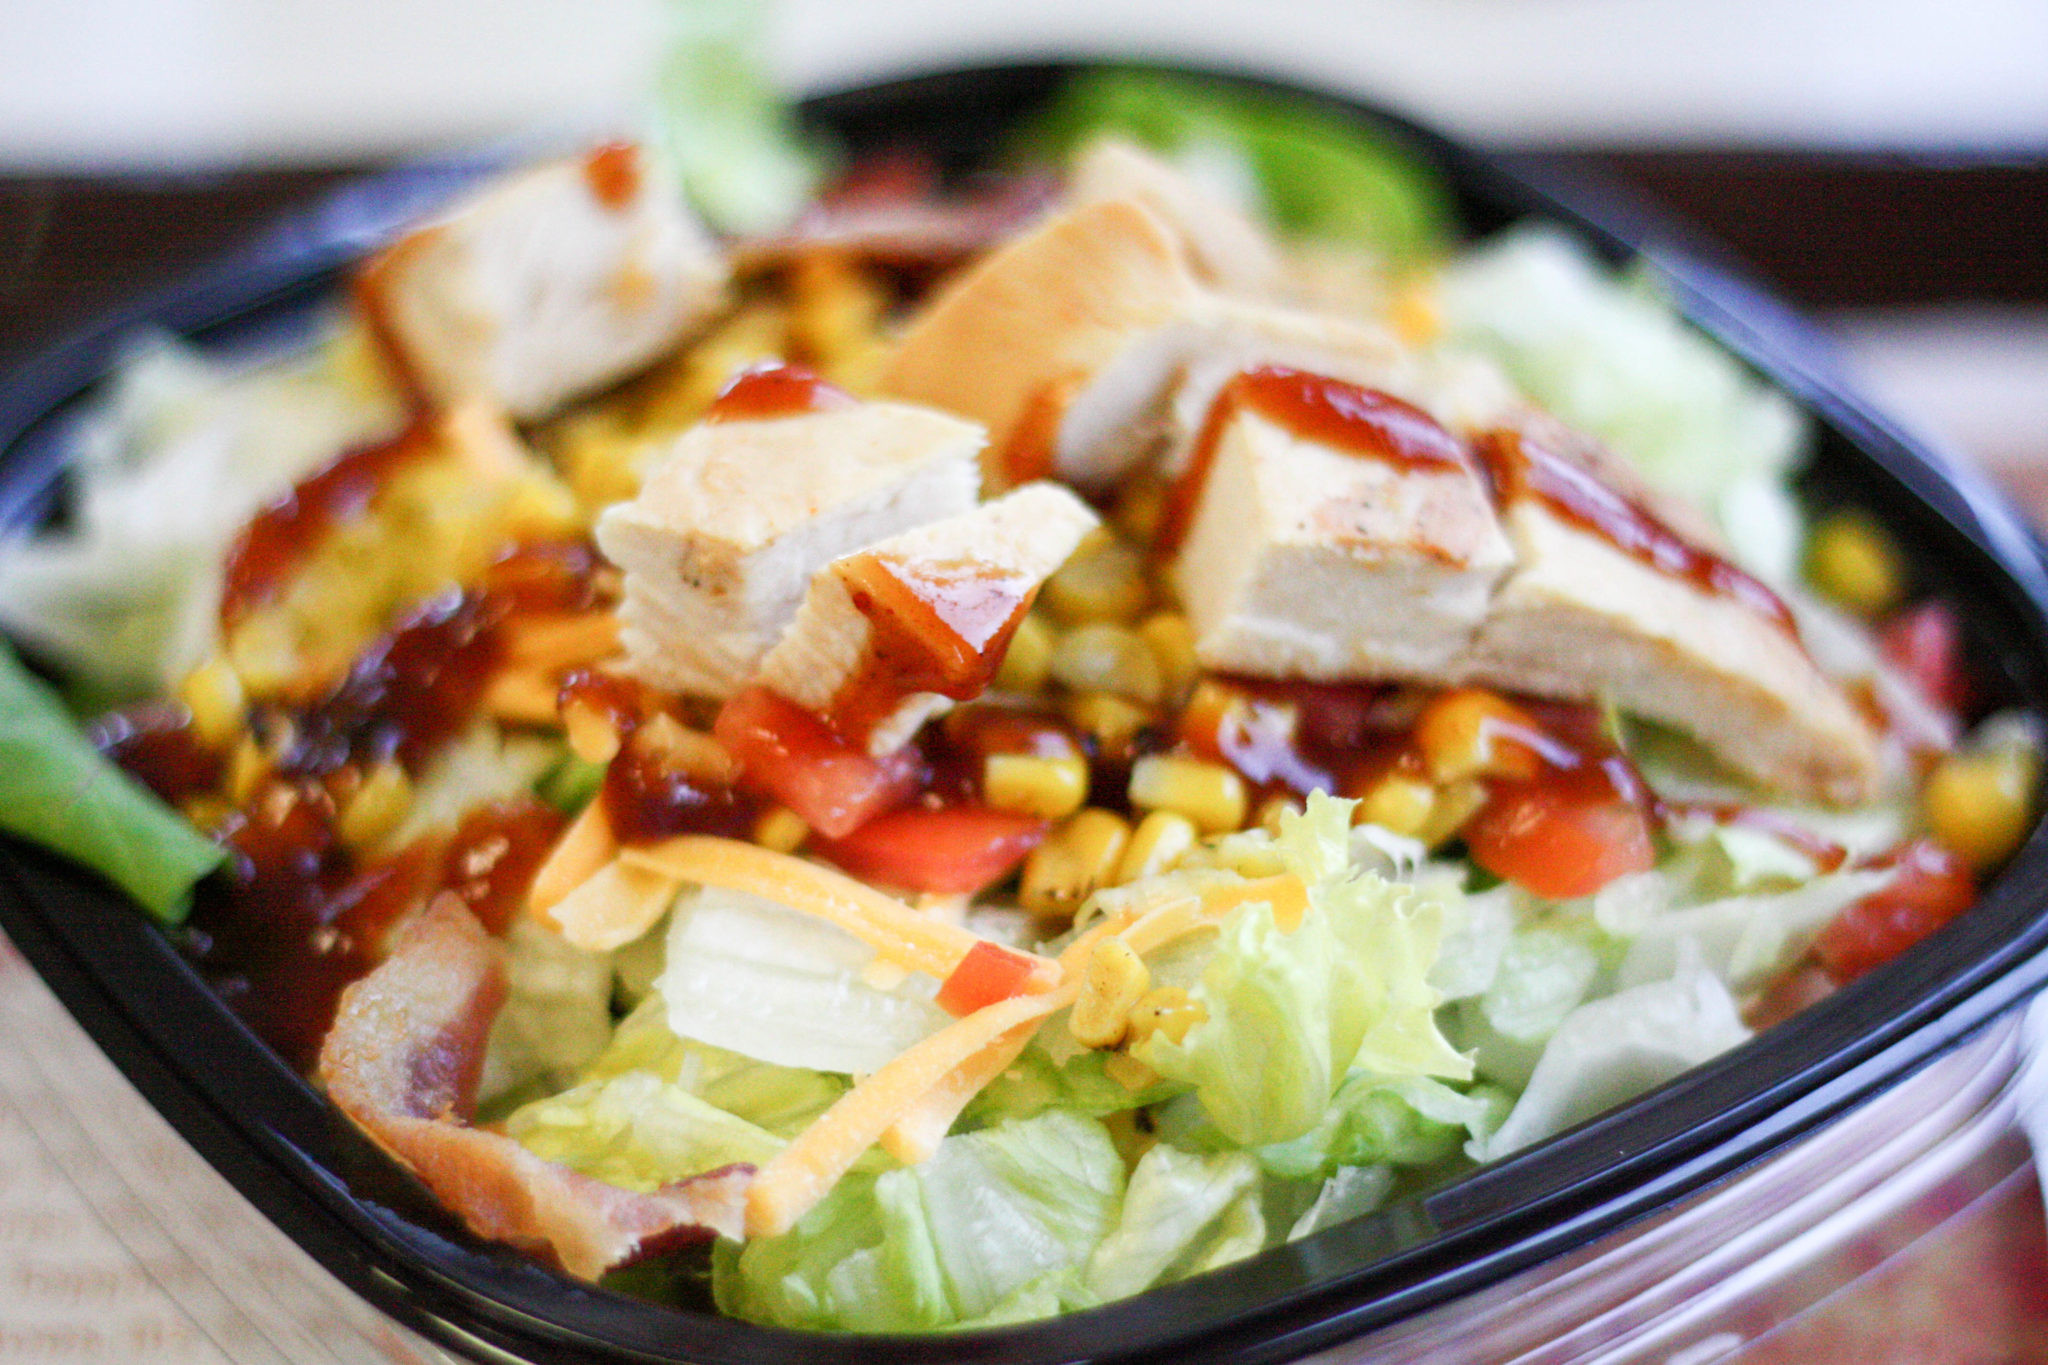 Wendys Salads Healthy 20 Of the Best Ideas for Making Healthier Choices with Wendy S Salads